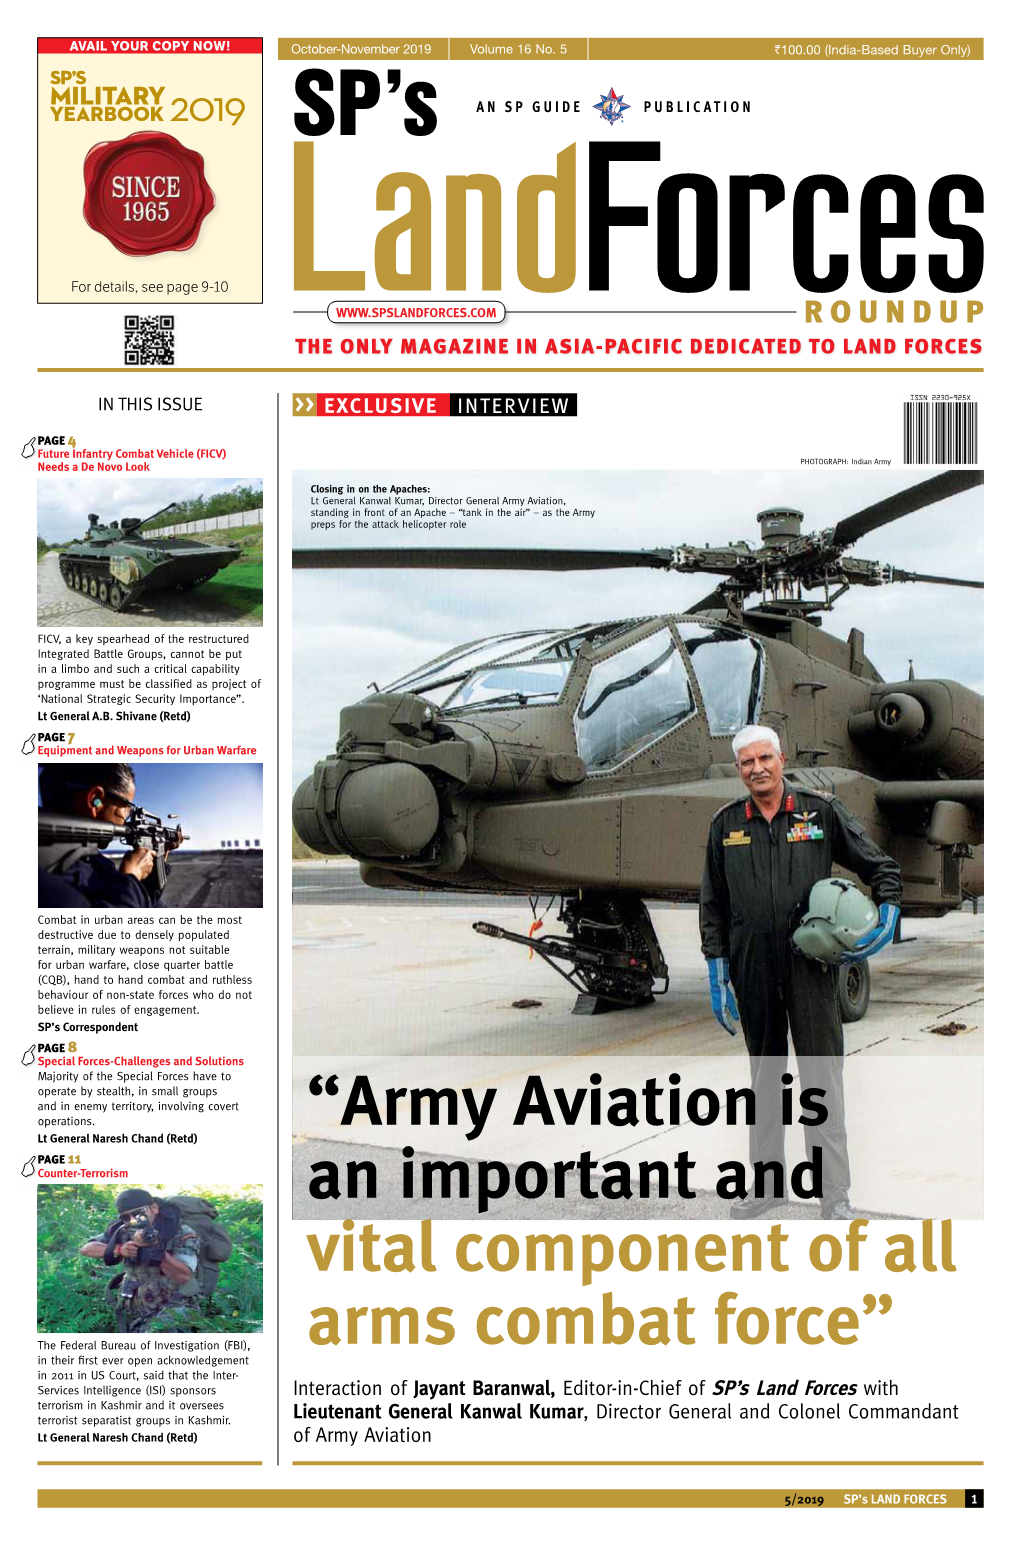 Army Aviation Is an Important and Vital Component of All